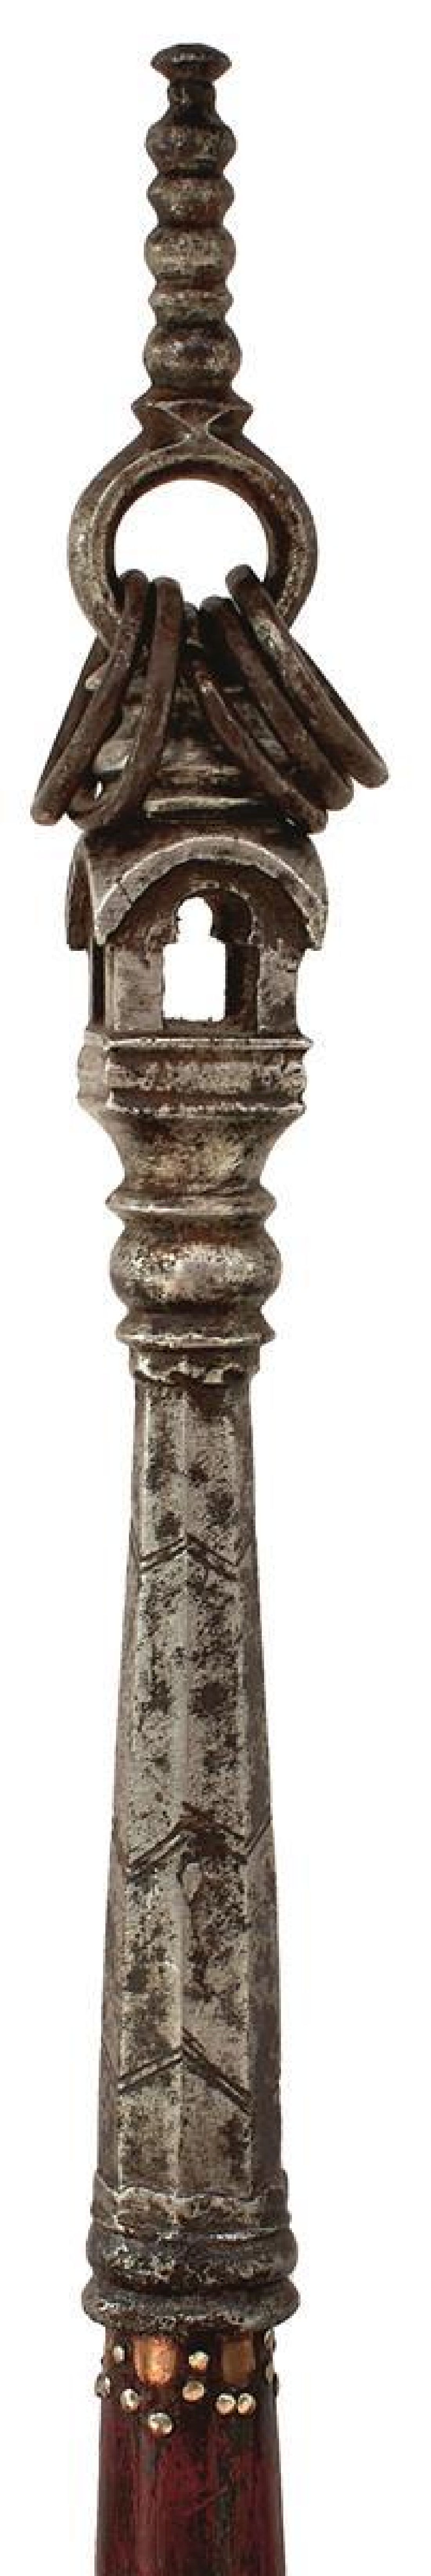 AN INDIAN KHAKKHARA OR BUDDHIST'S STAFF, the iron pagoda top with five rings and geometric line